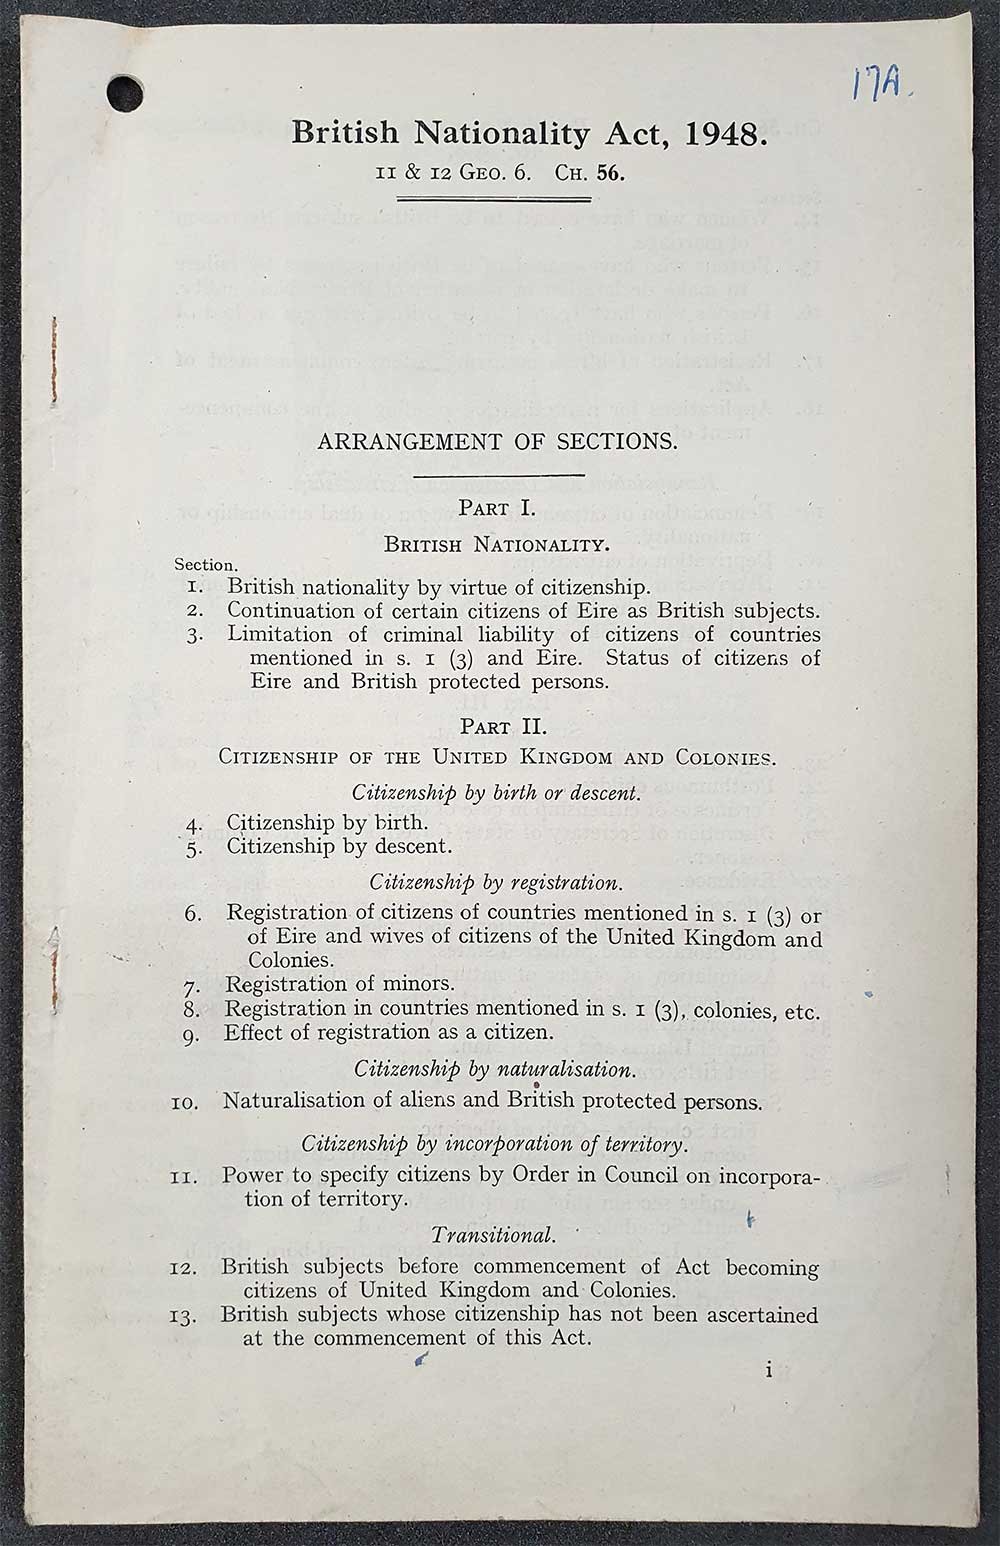 The front page of an official document. The title reads 'British Nationality Act, 1948'